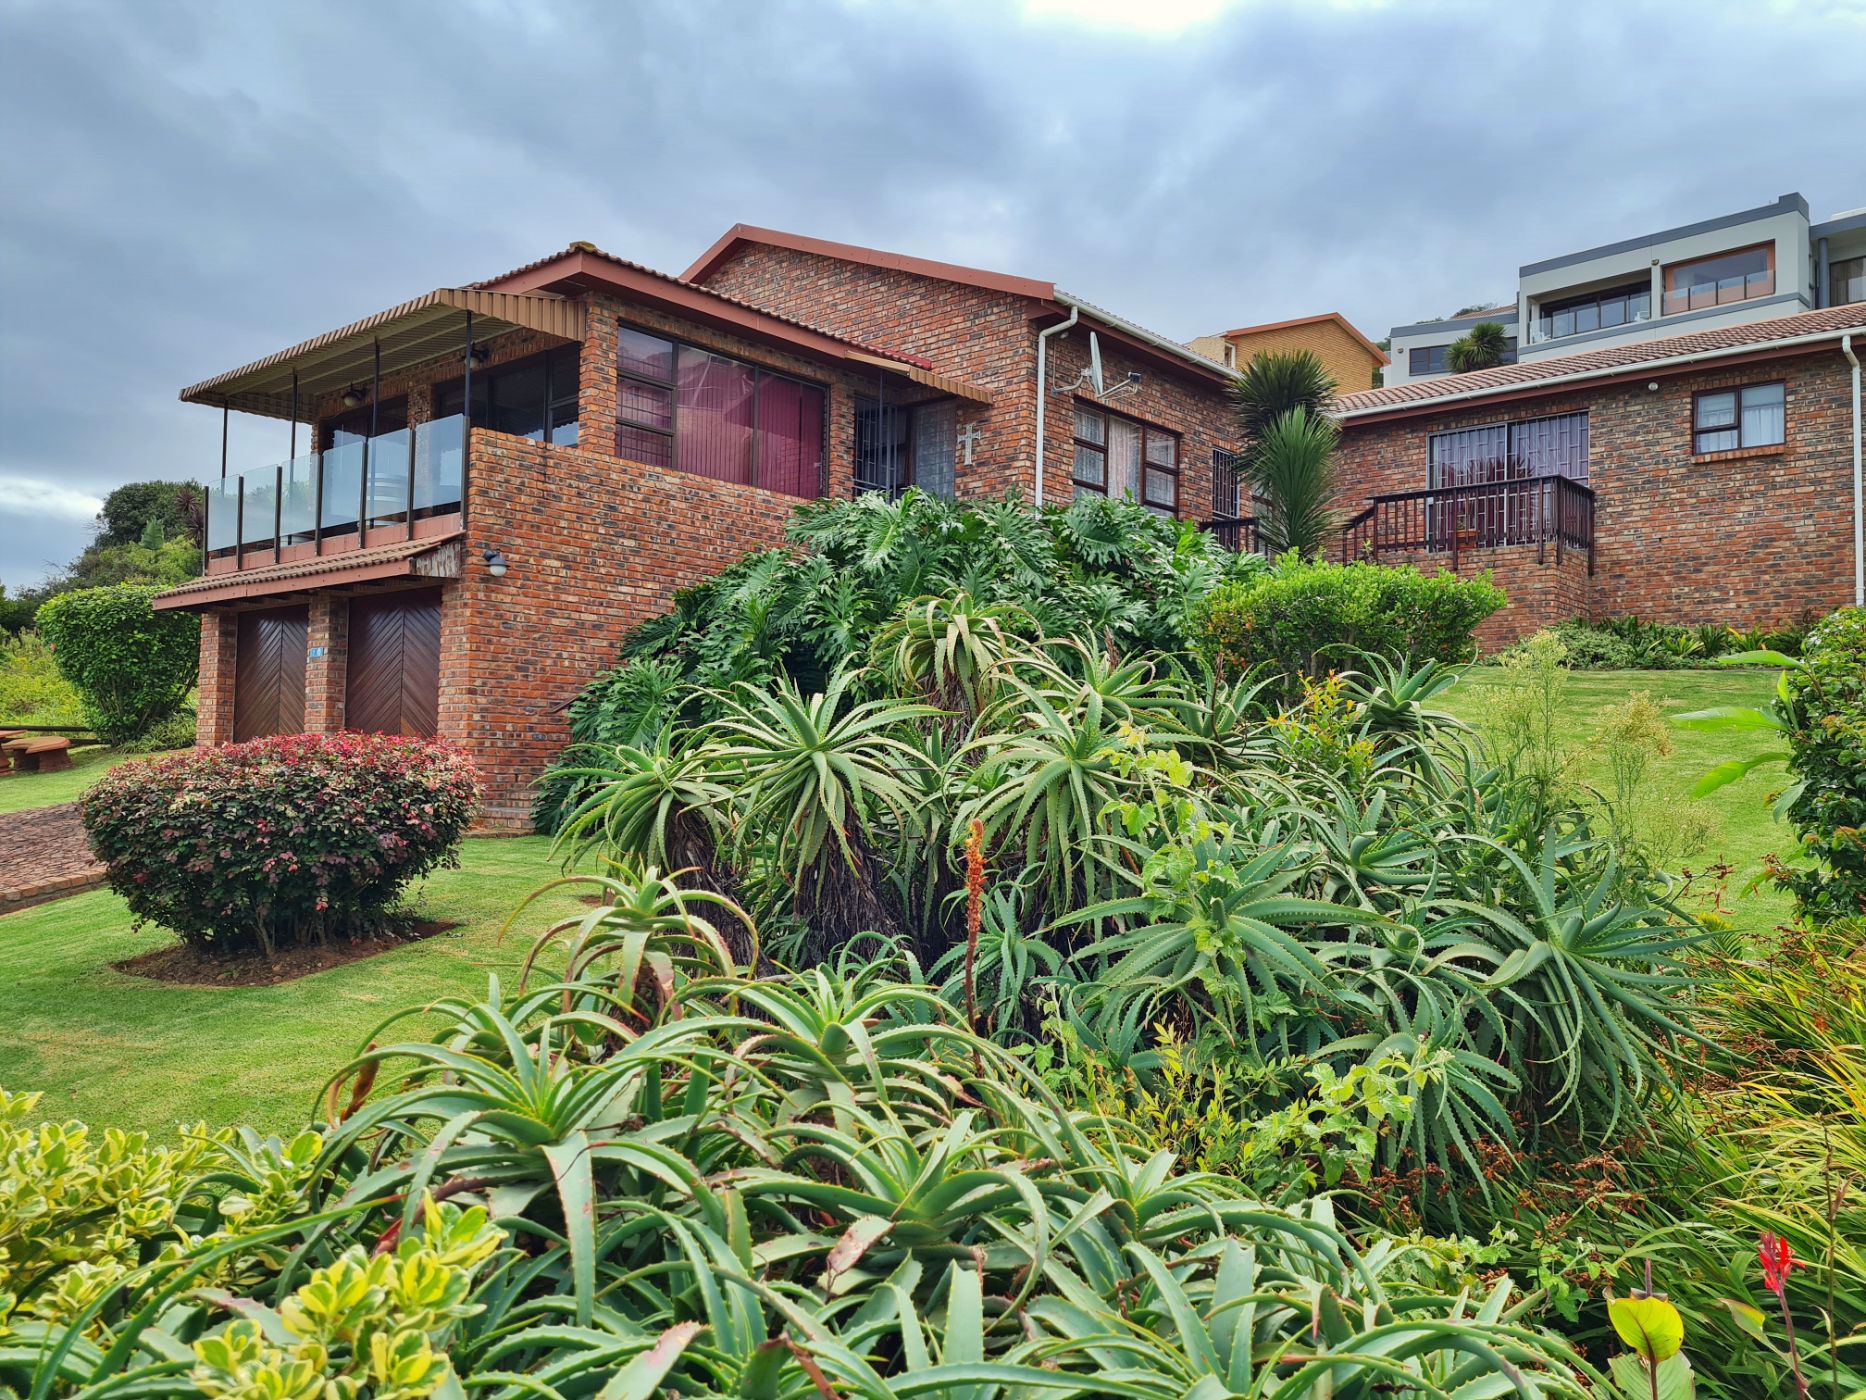 3 bedroom house for sale in Outeniqua Strand